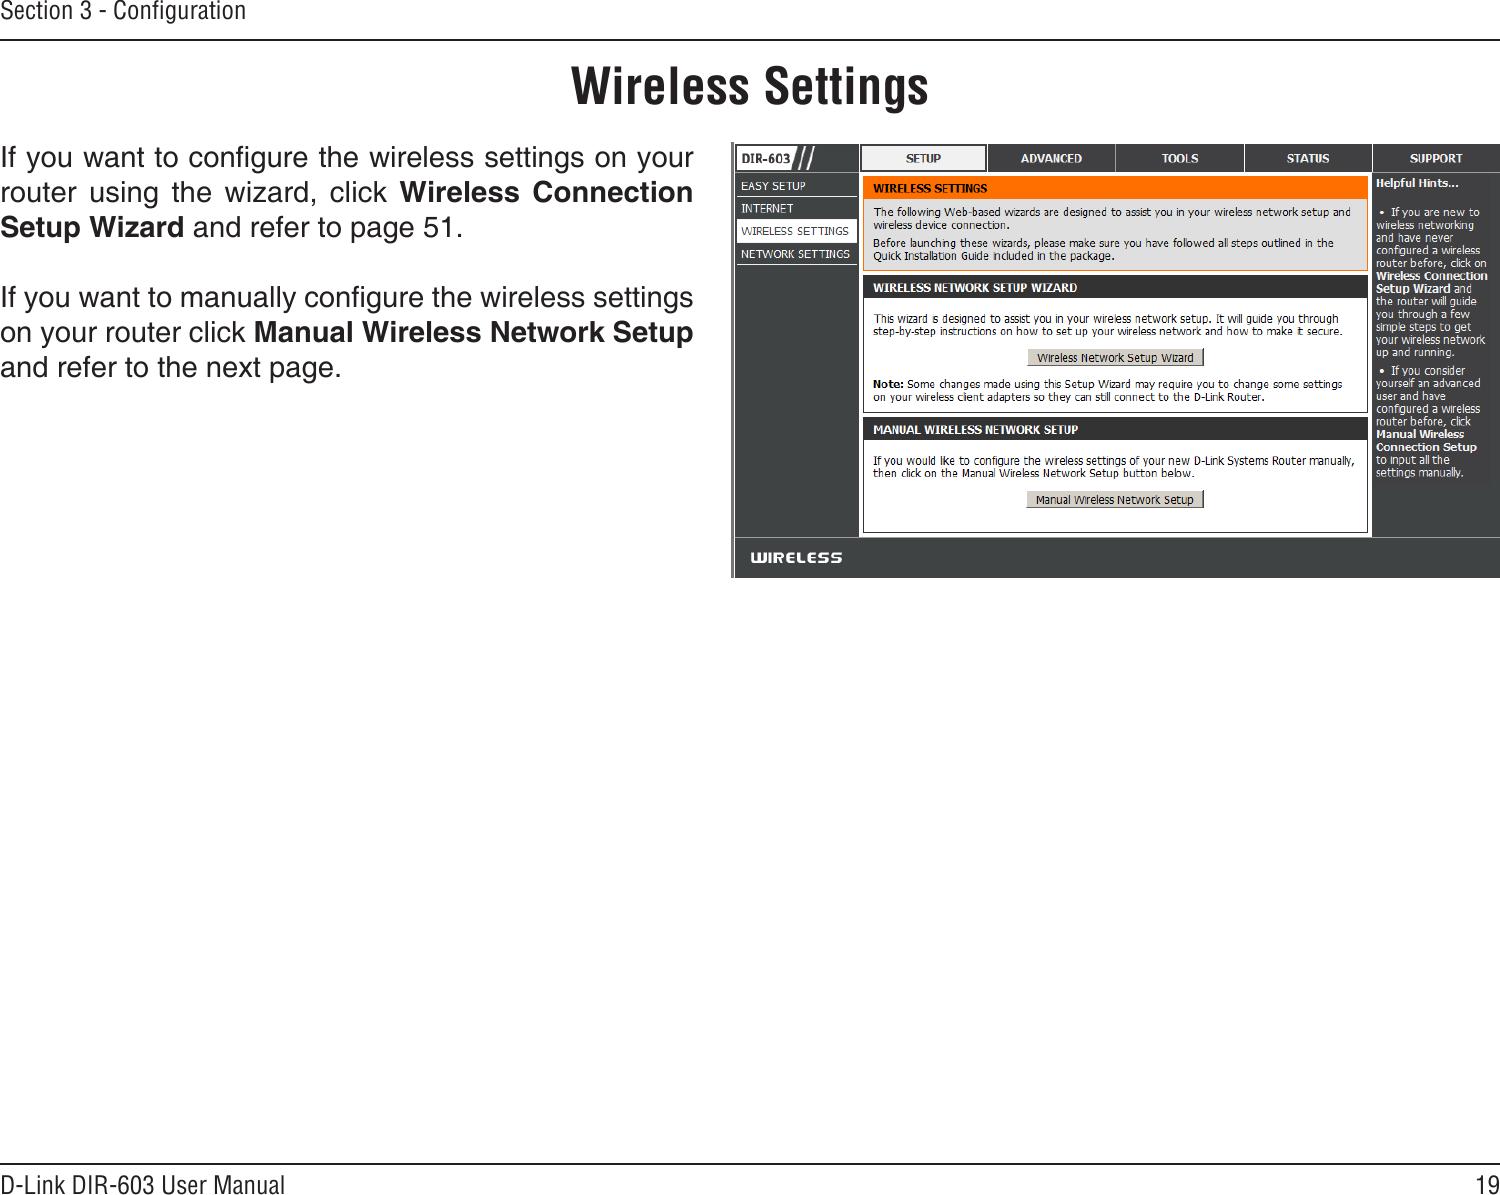 19D-Link DIR-603 User ManualSection 3 - CongurationWireless SettingsIf you want to congure the wireless settings on your router  using  the  wizard,  click  Wireless  Connection  Setup Wizard and refer to page 51.If you want to manually congure the wireless settings on your router click Manual Wireless Network Setup and refer to the next page.